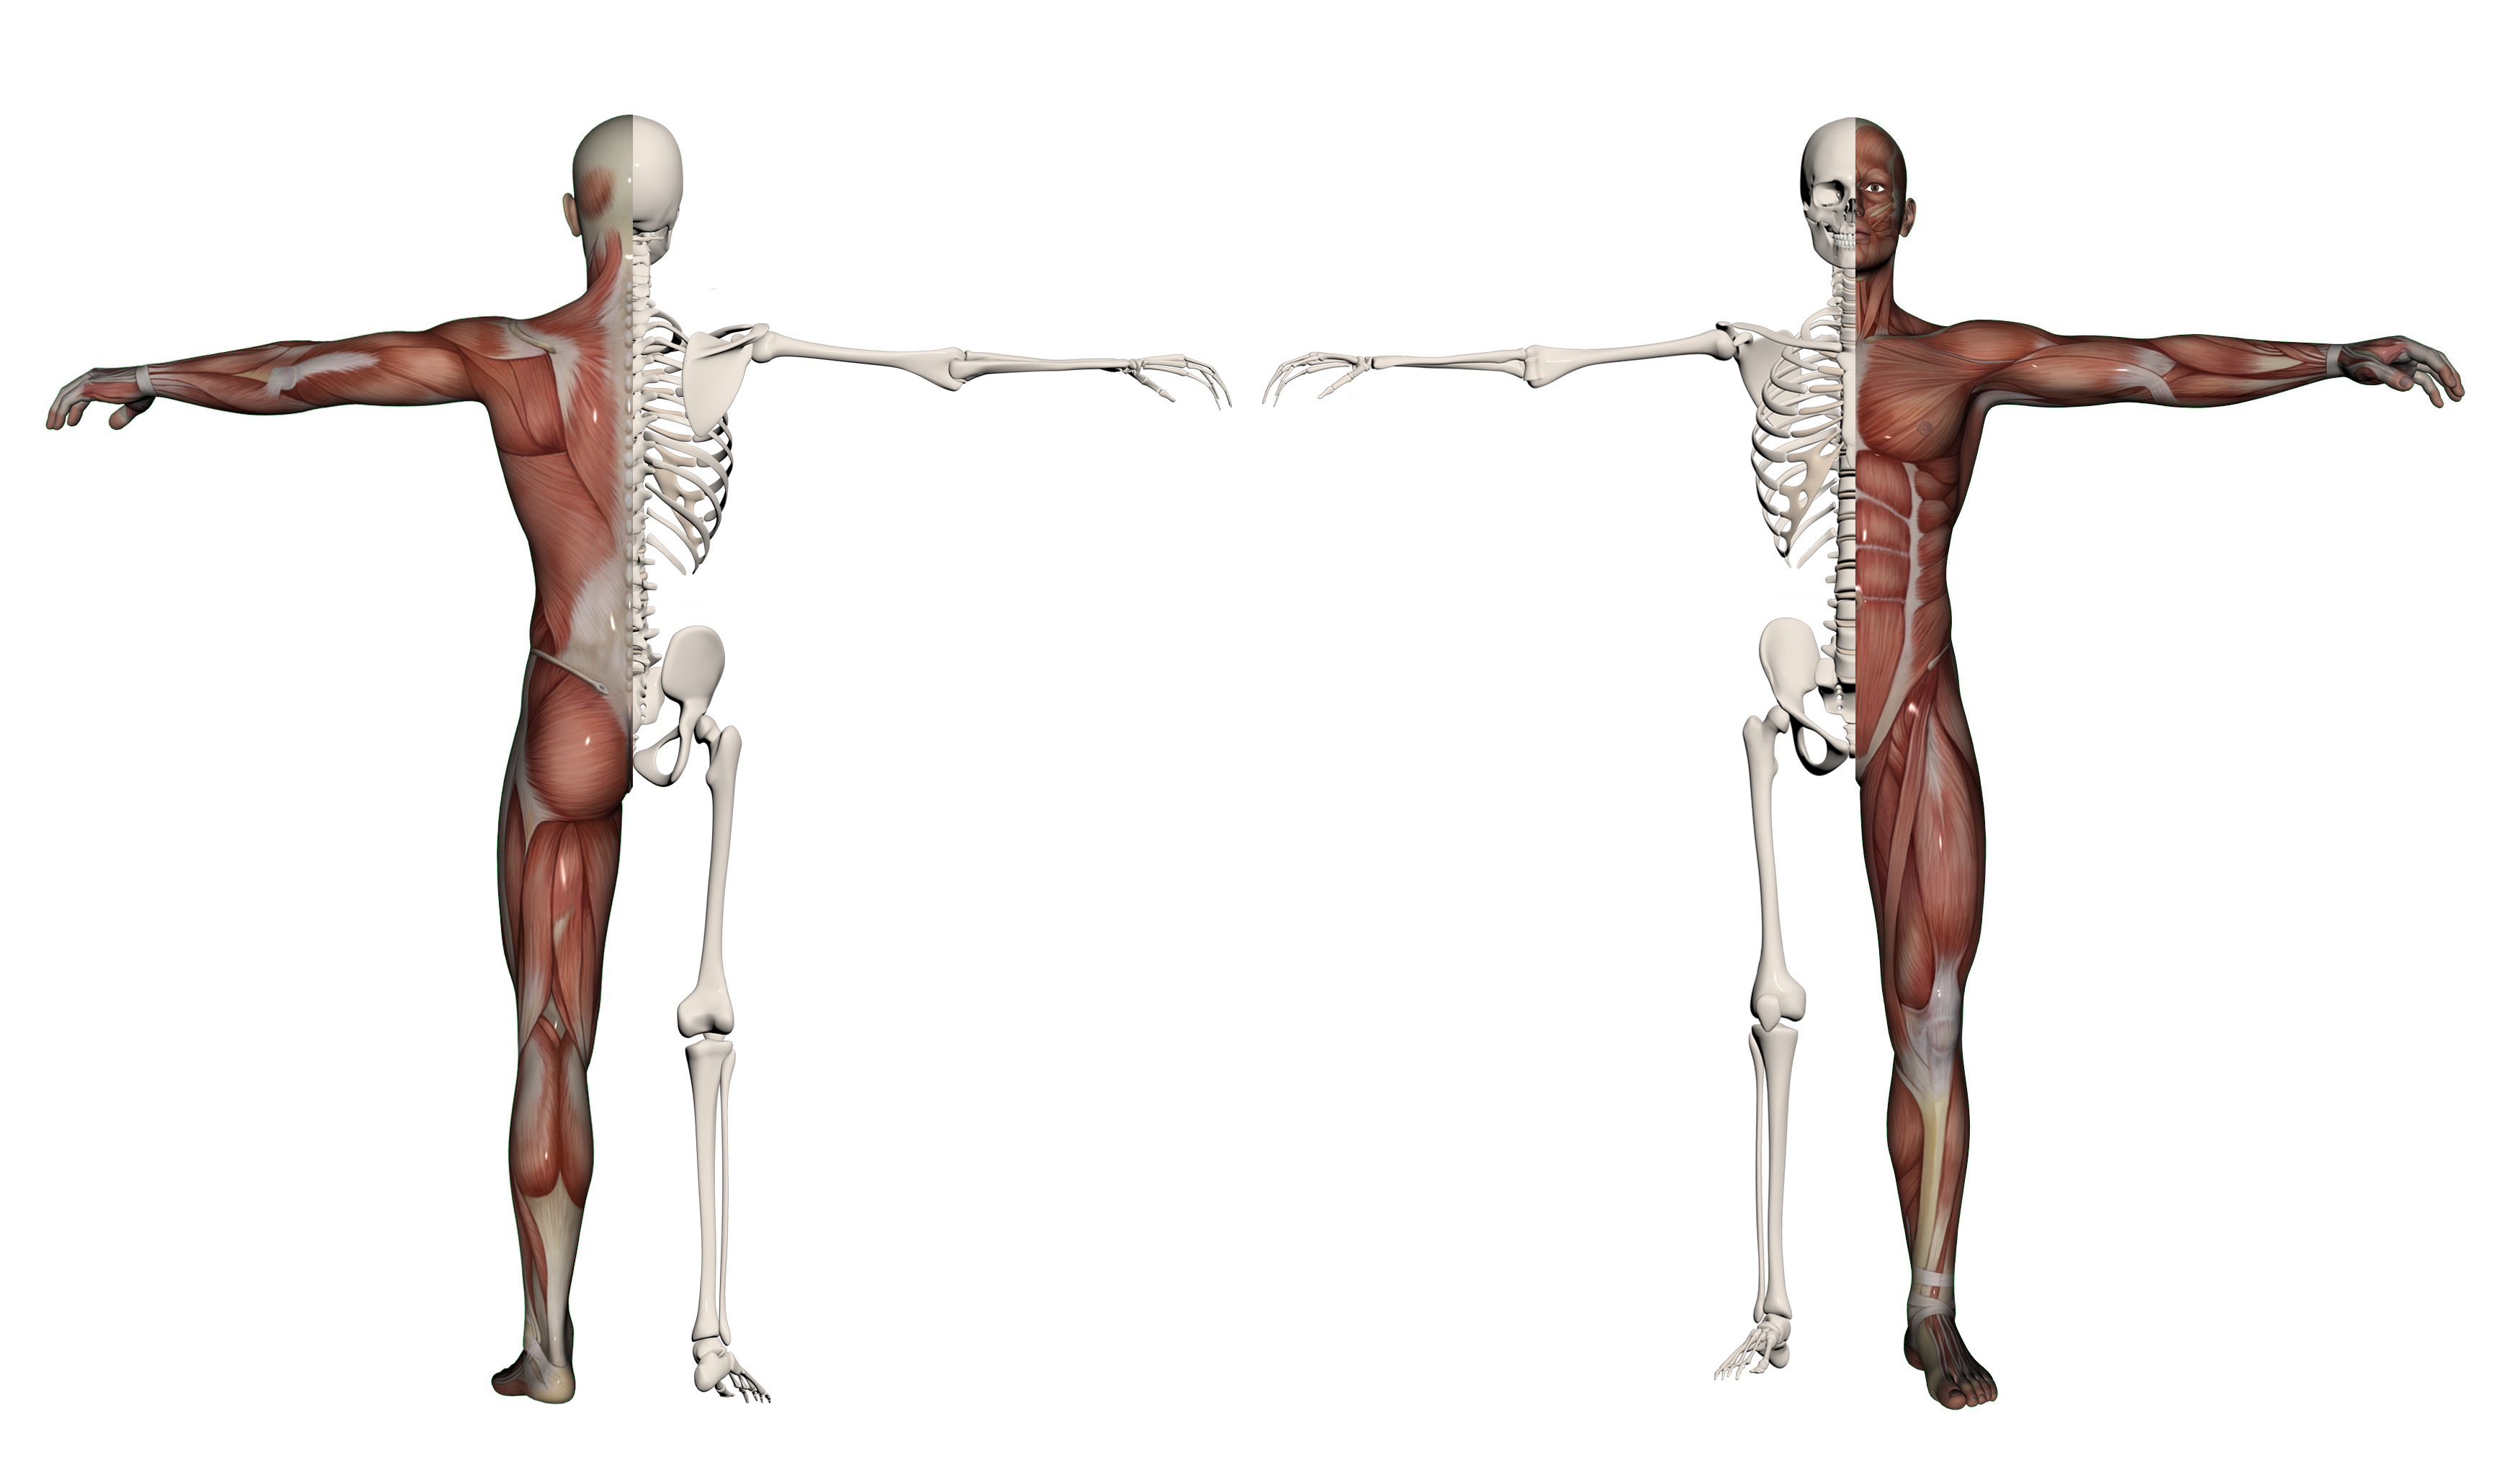 Human body of a man with muscles and skeleton/a reminder that we're all the same